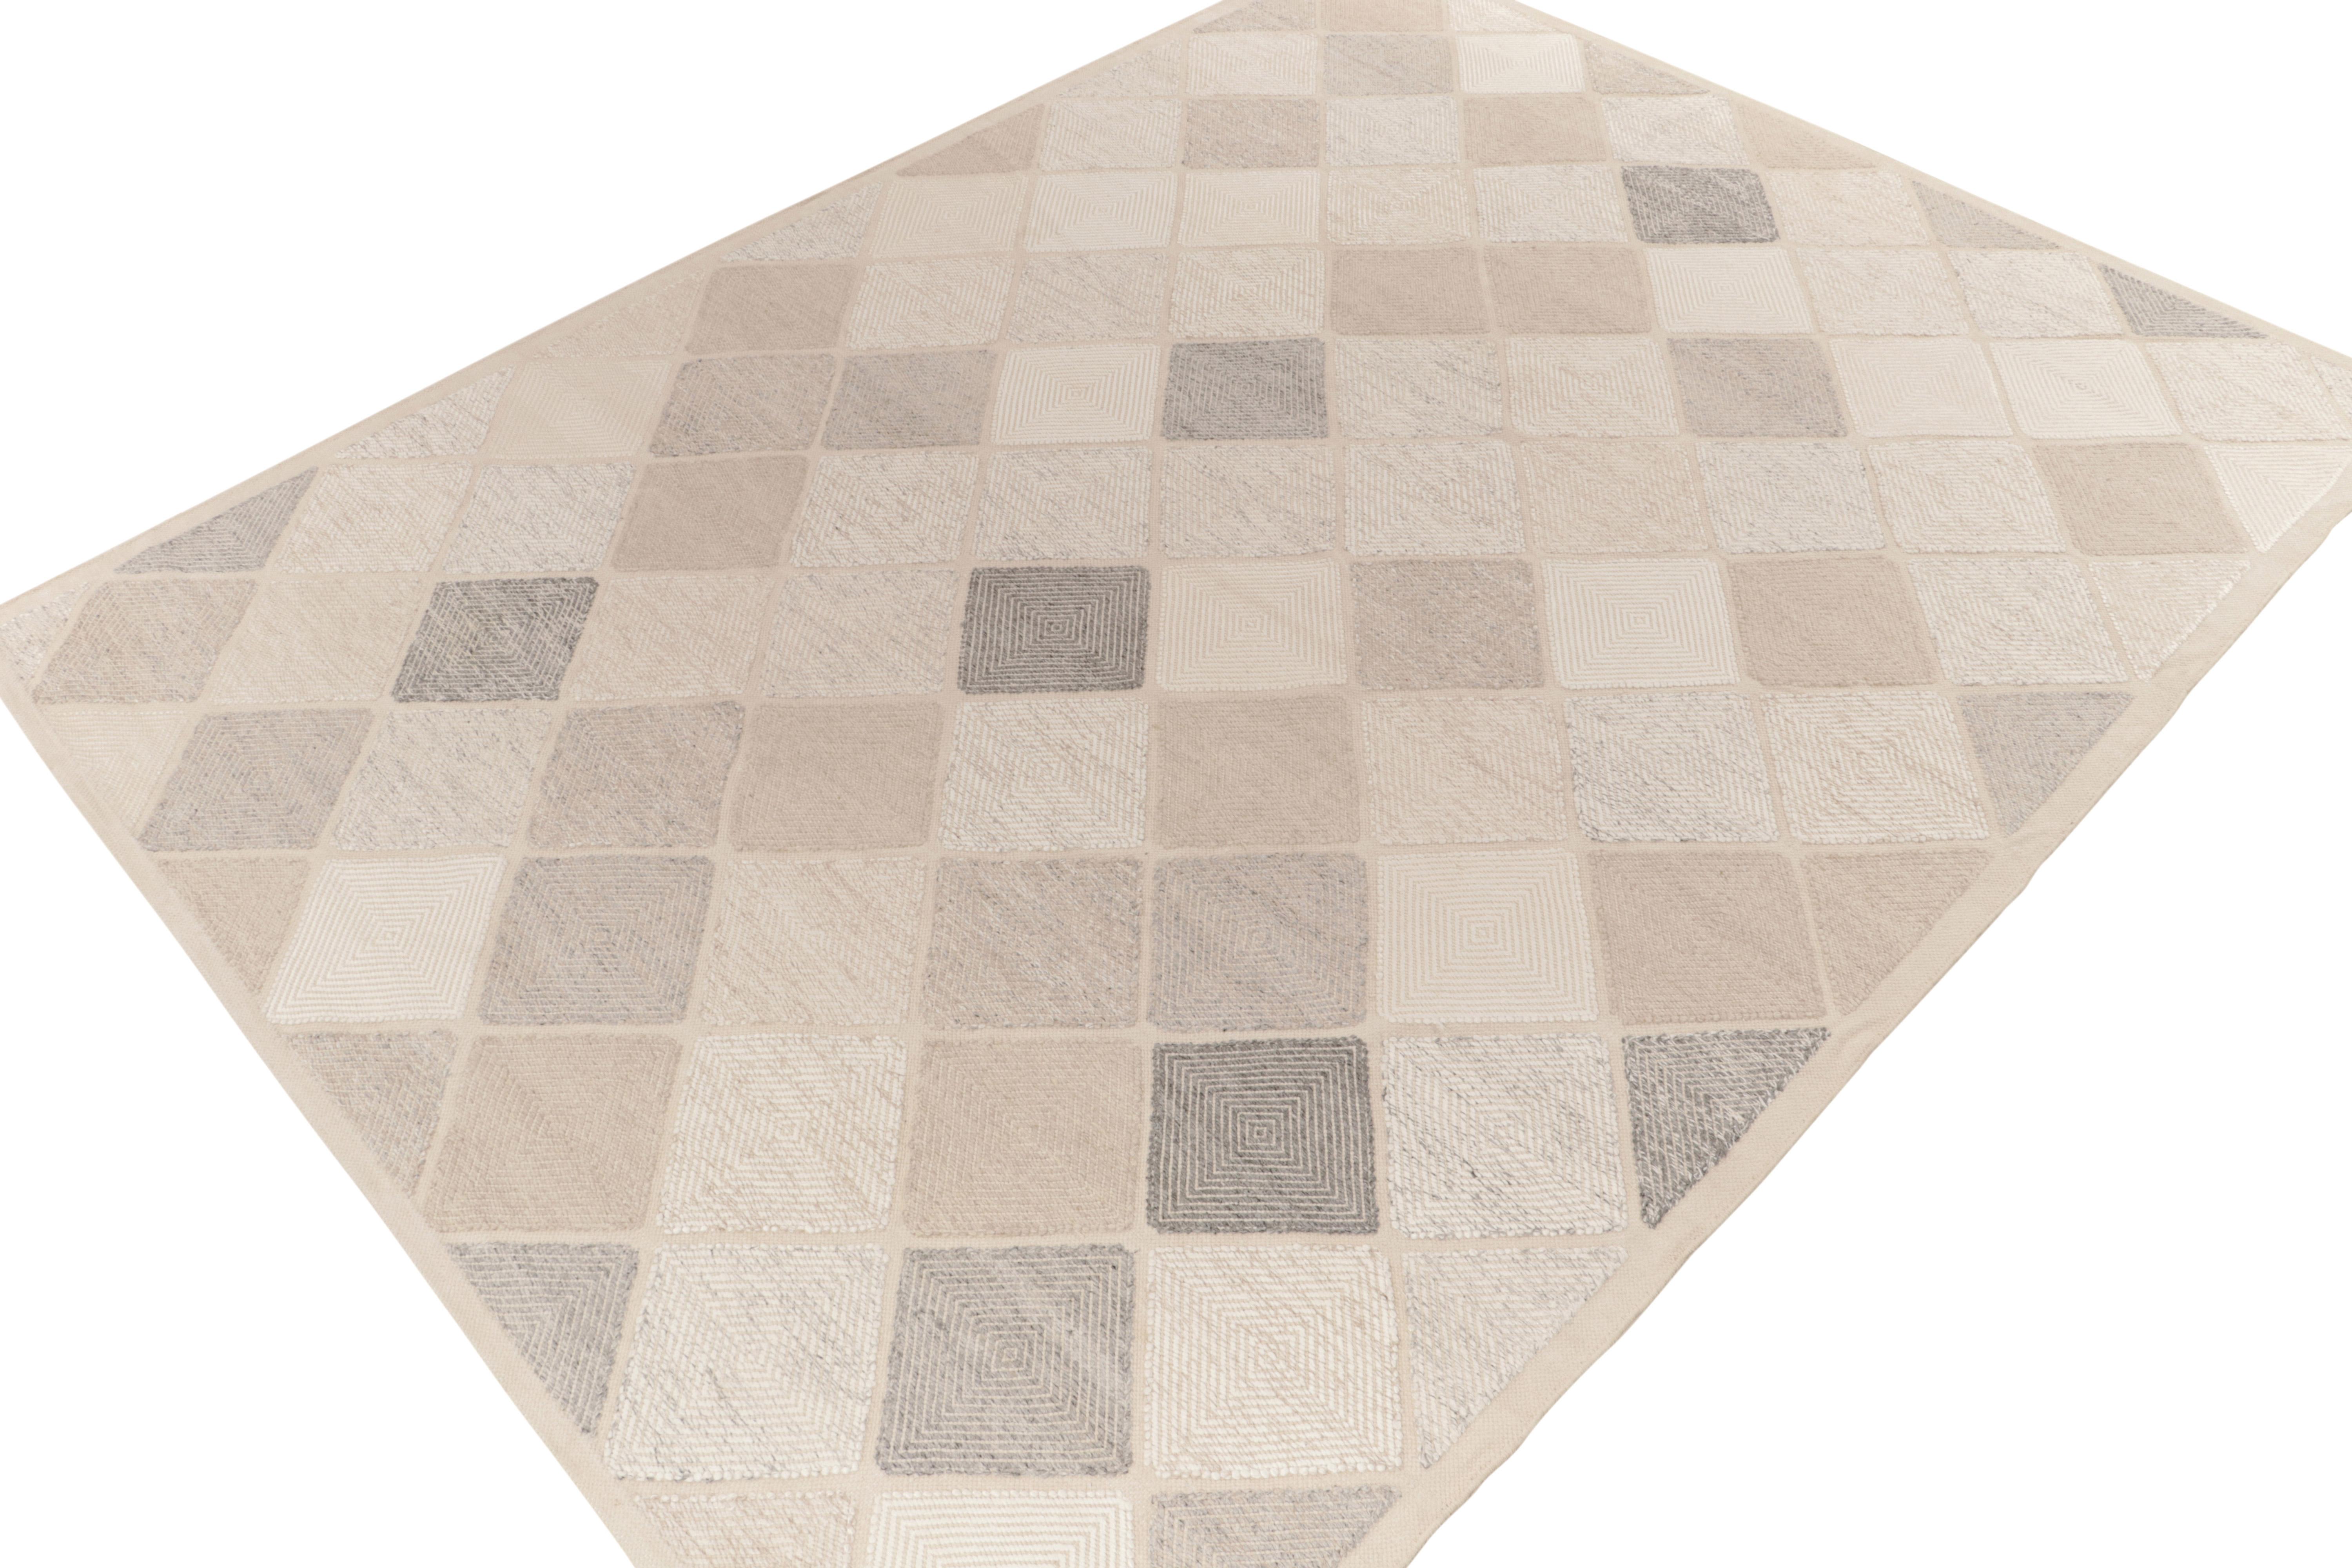 Rug & Kilim presents this exquisite 6x9 Scandinavian kilim from the Morocco line of the award-winning flat weave texture. The handwoven piece flows in an all over half diamond pattern in a delightful blend of beige, stone blue, grey & white. The